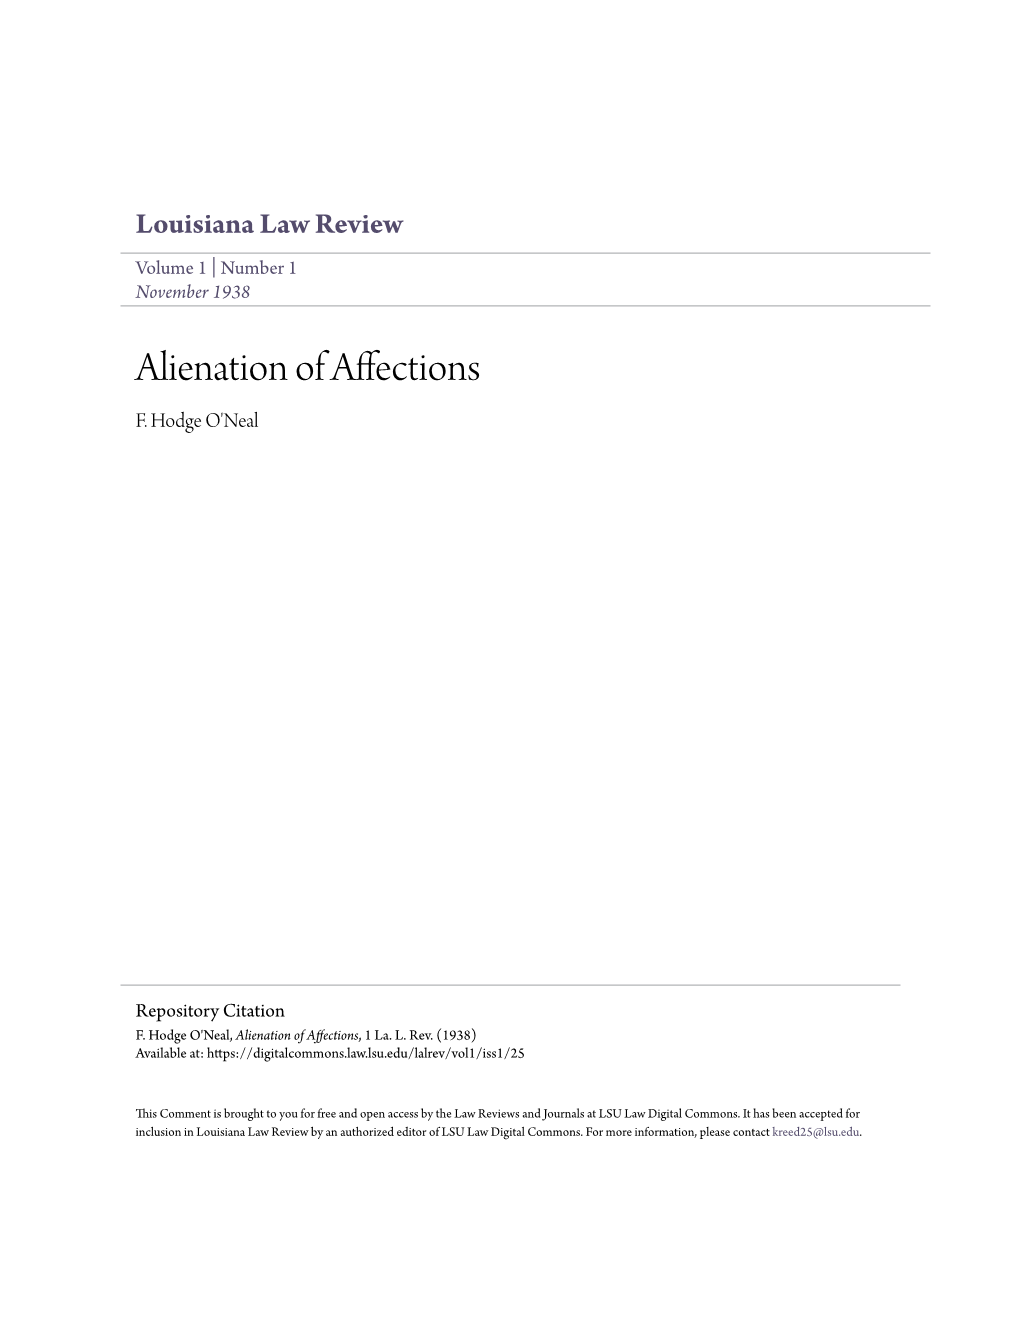 Alienation of Affections F